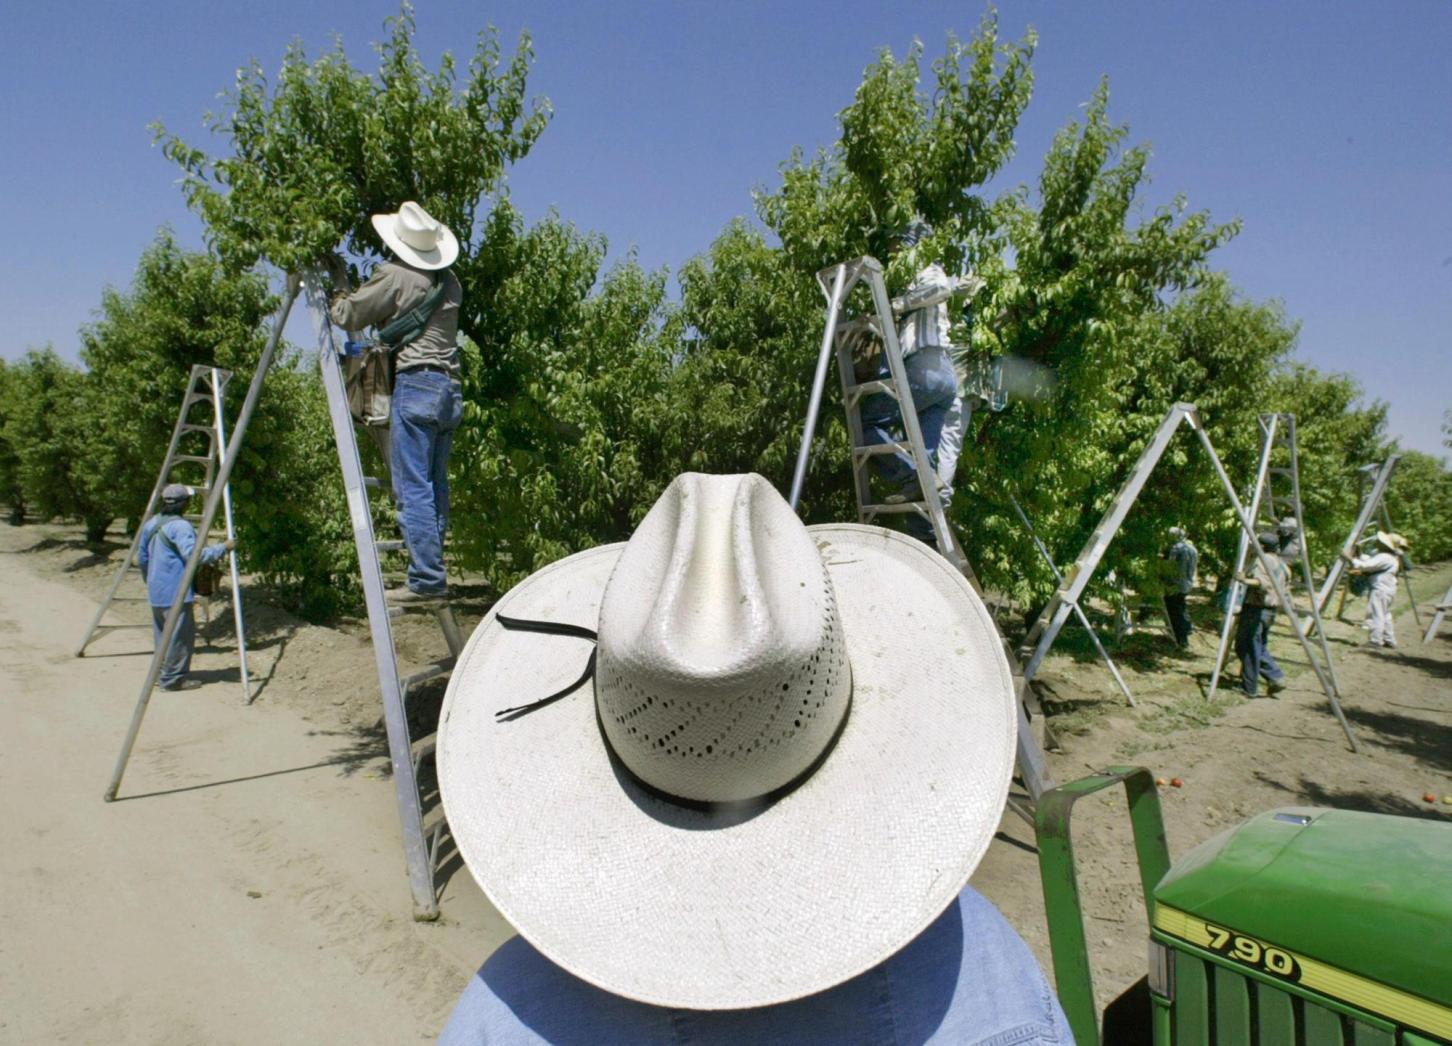 Agriculture pesticide caused kids’ brain damage, California lawsuits say